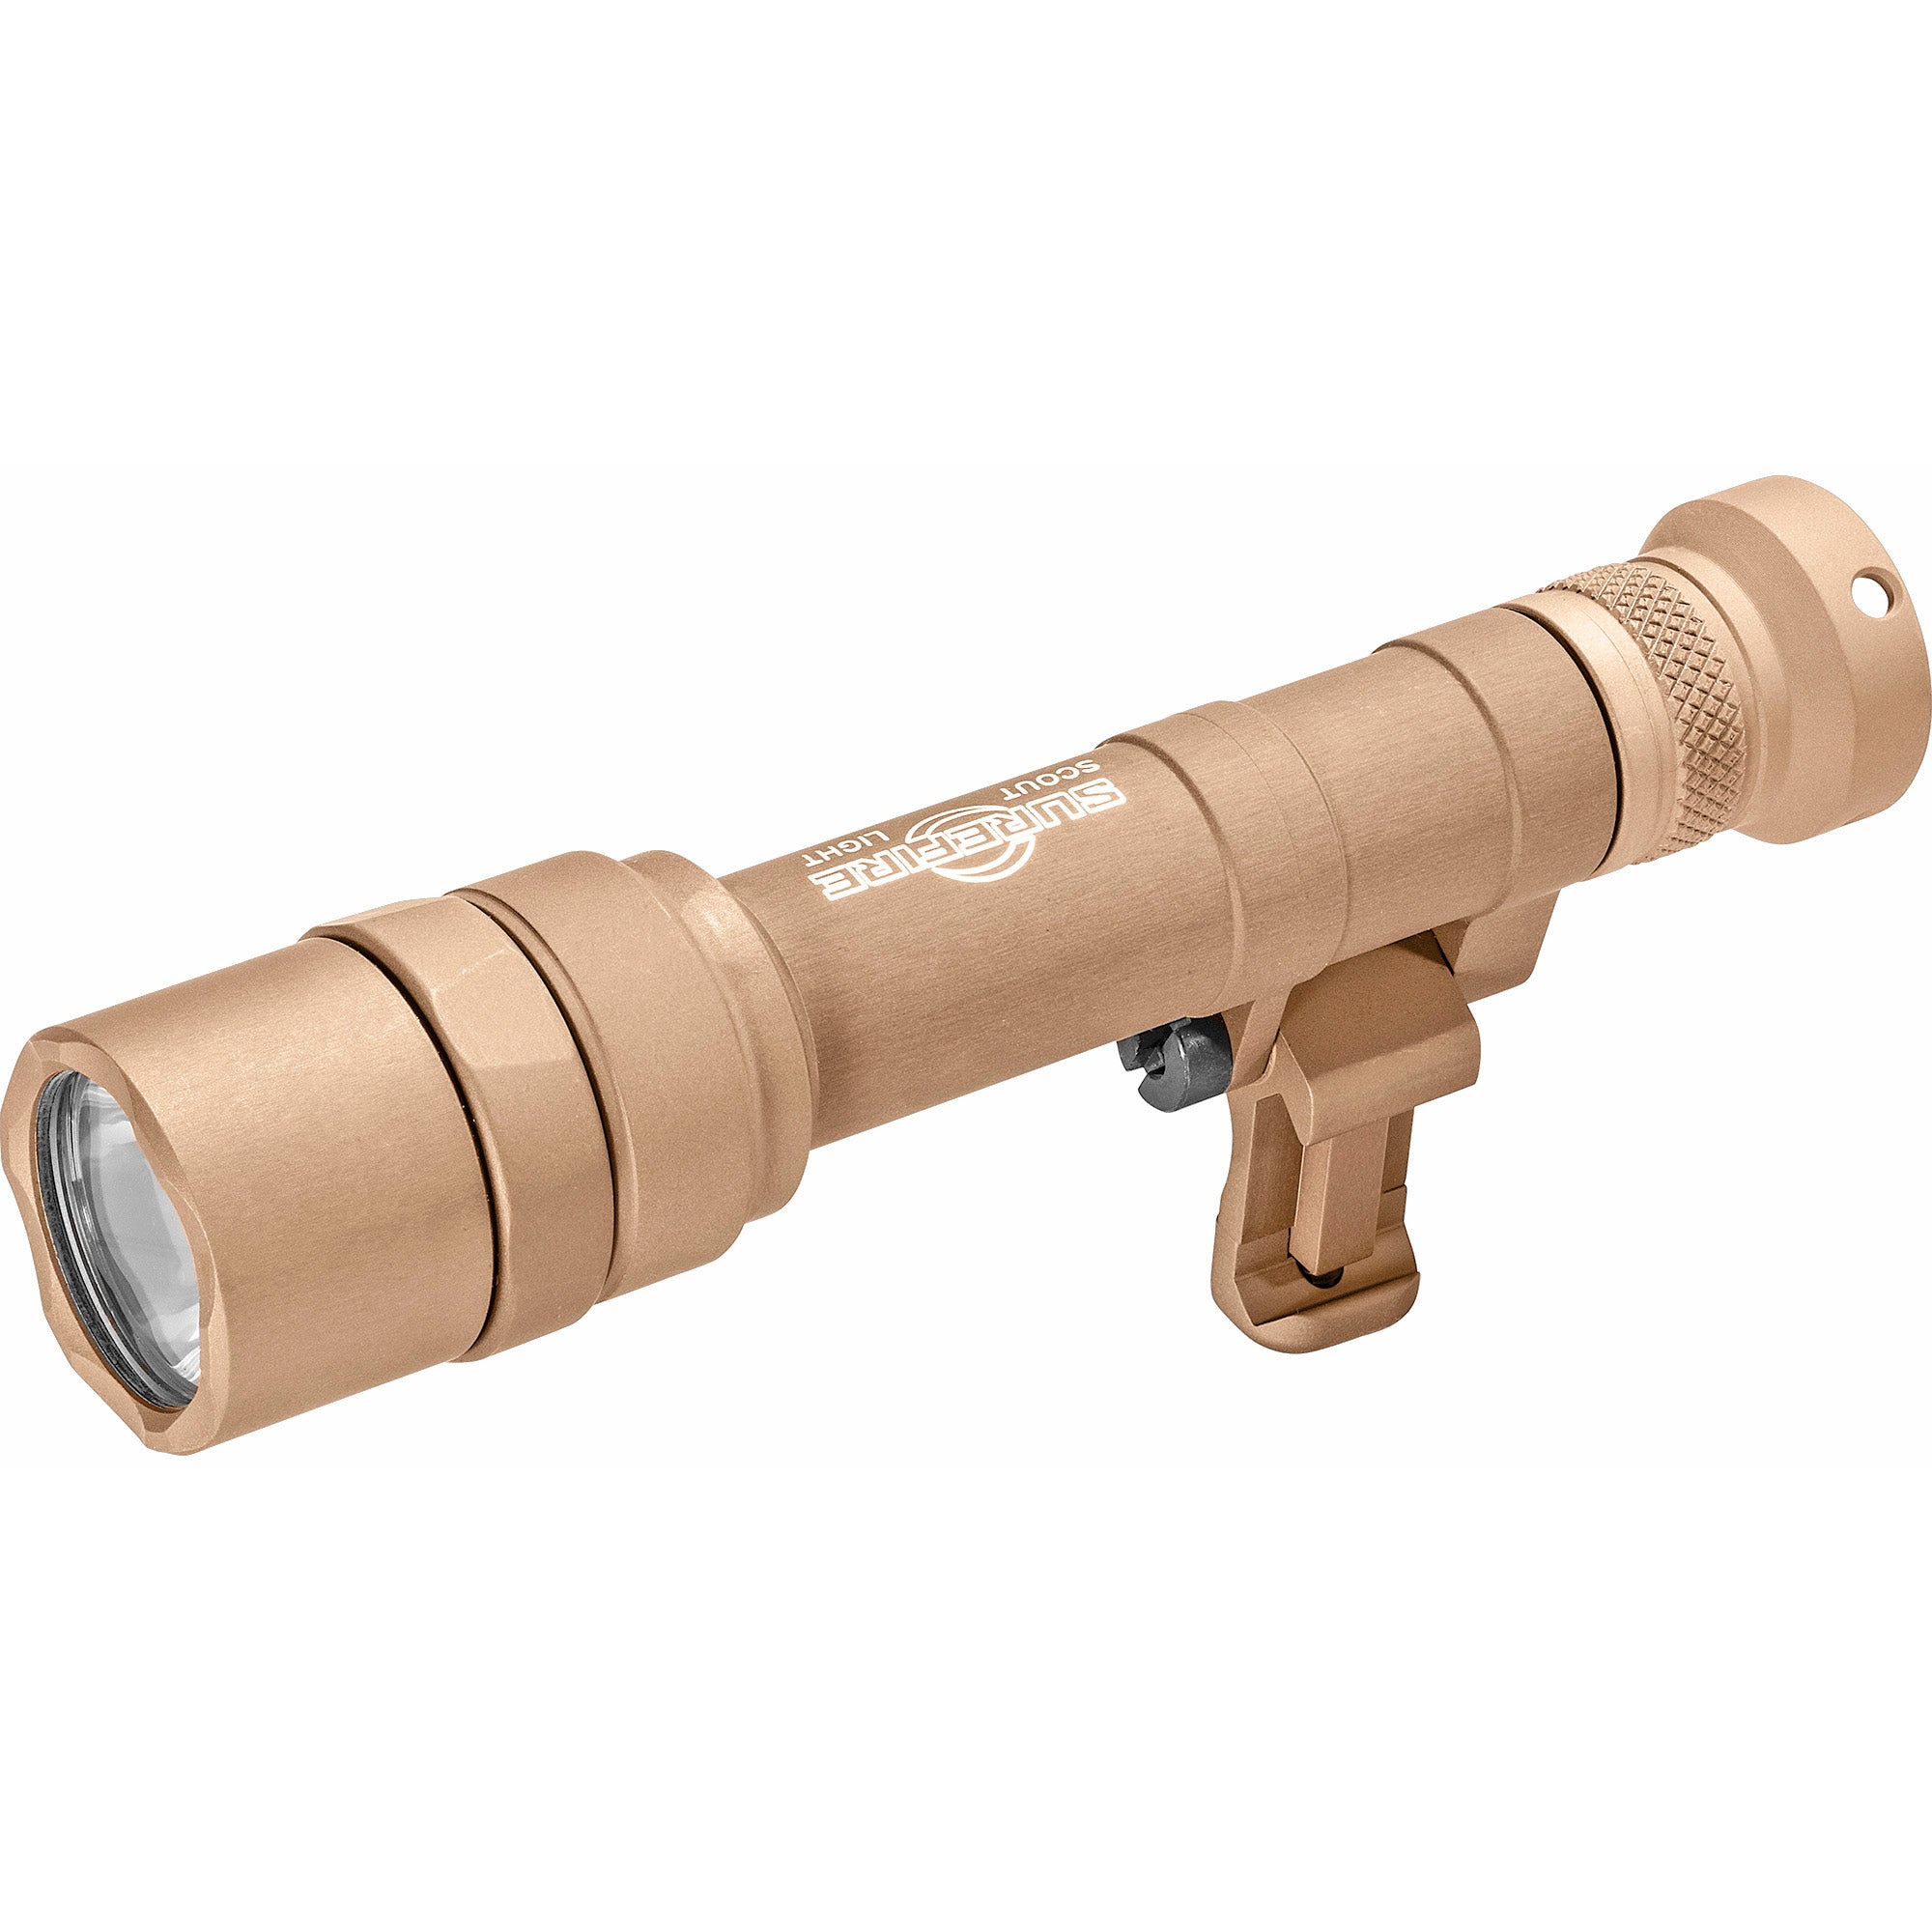 Surefire M640U Scout Pro Flashlight in tan, featuring 1000 lumens LED output, equipped with 1913 Picatinny and M-LOK mounts, and a user-friendly Z68 On/Off tailcap.